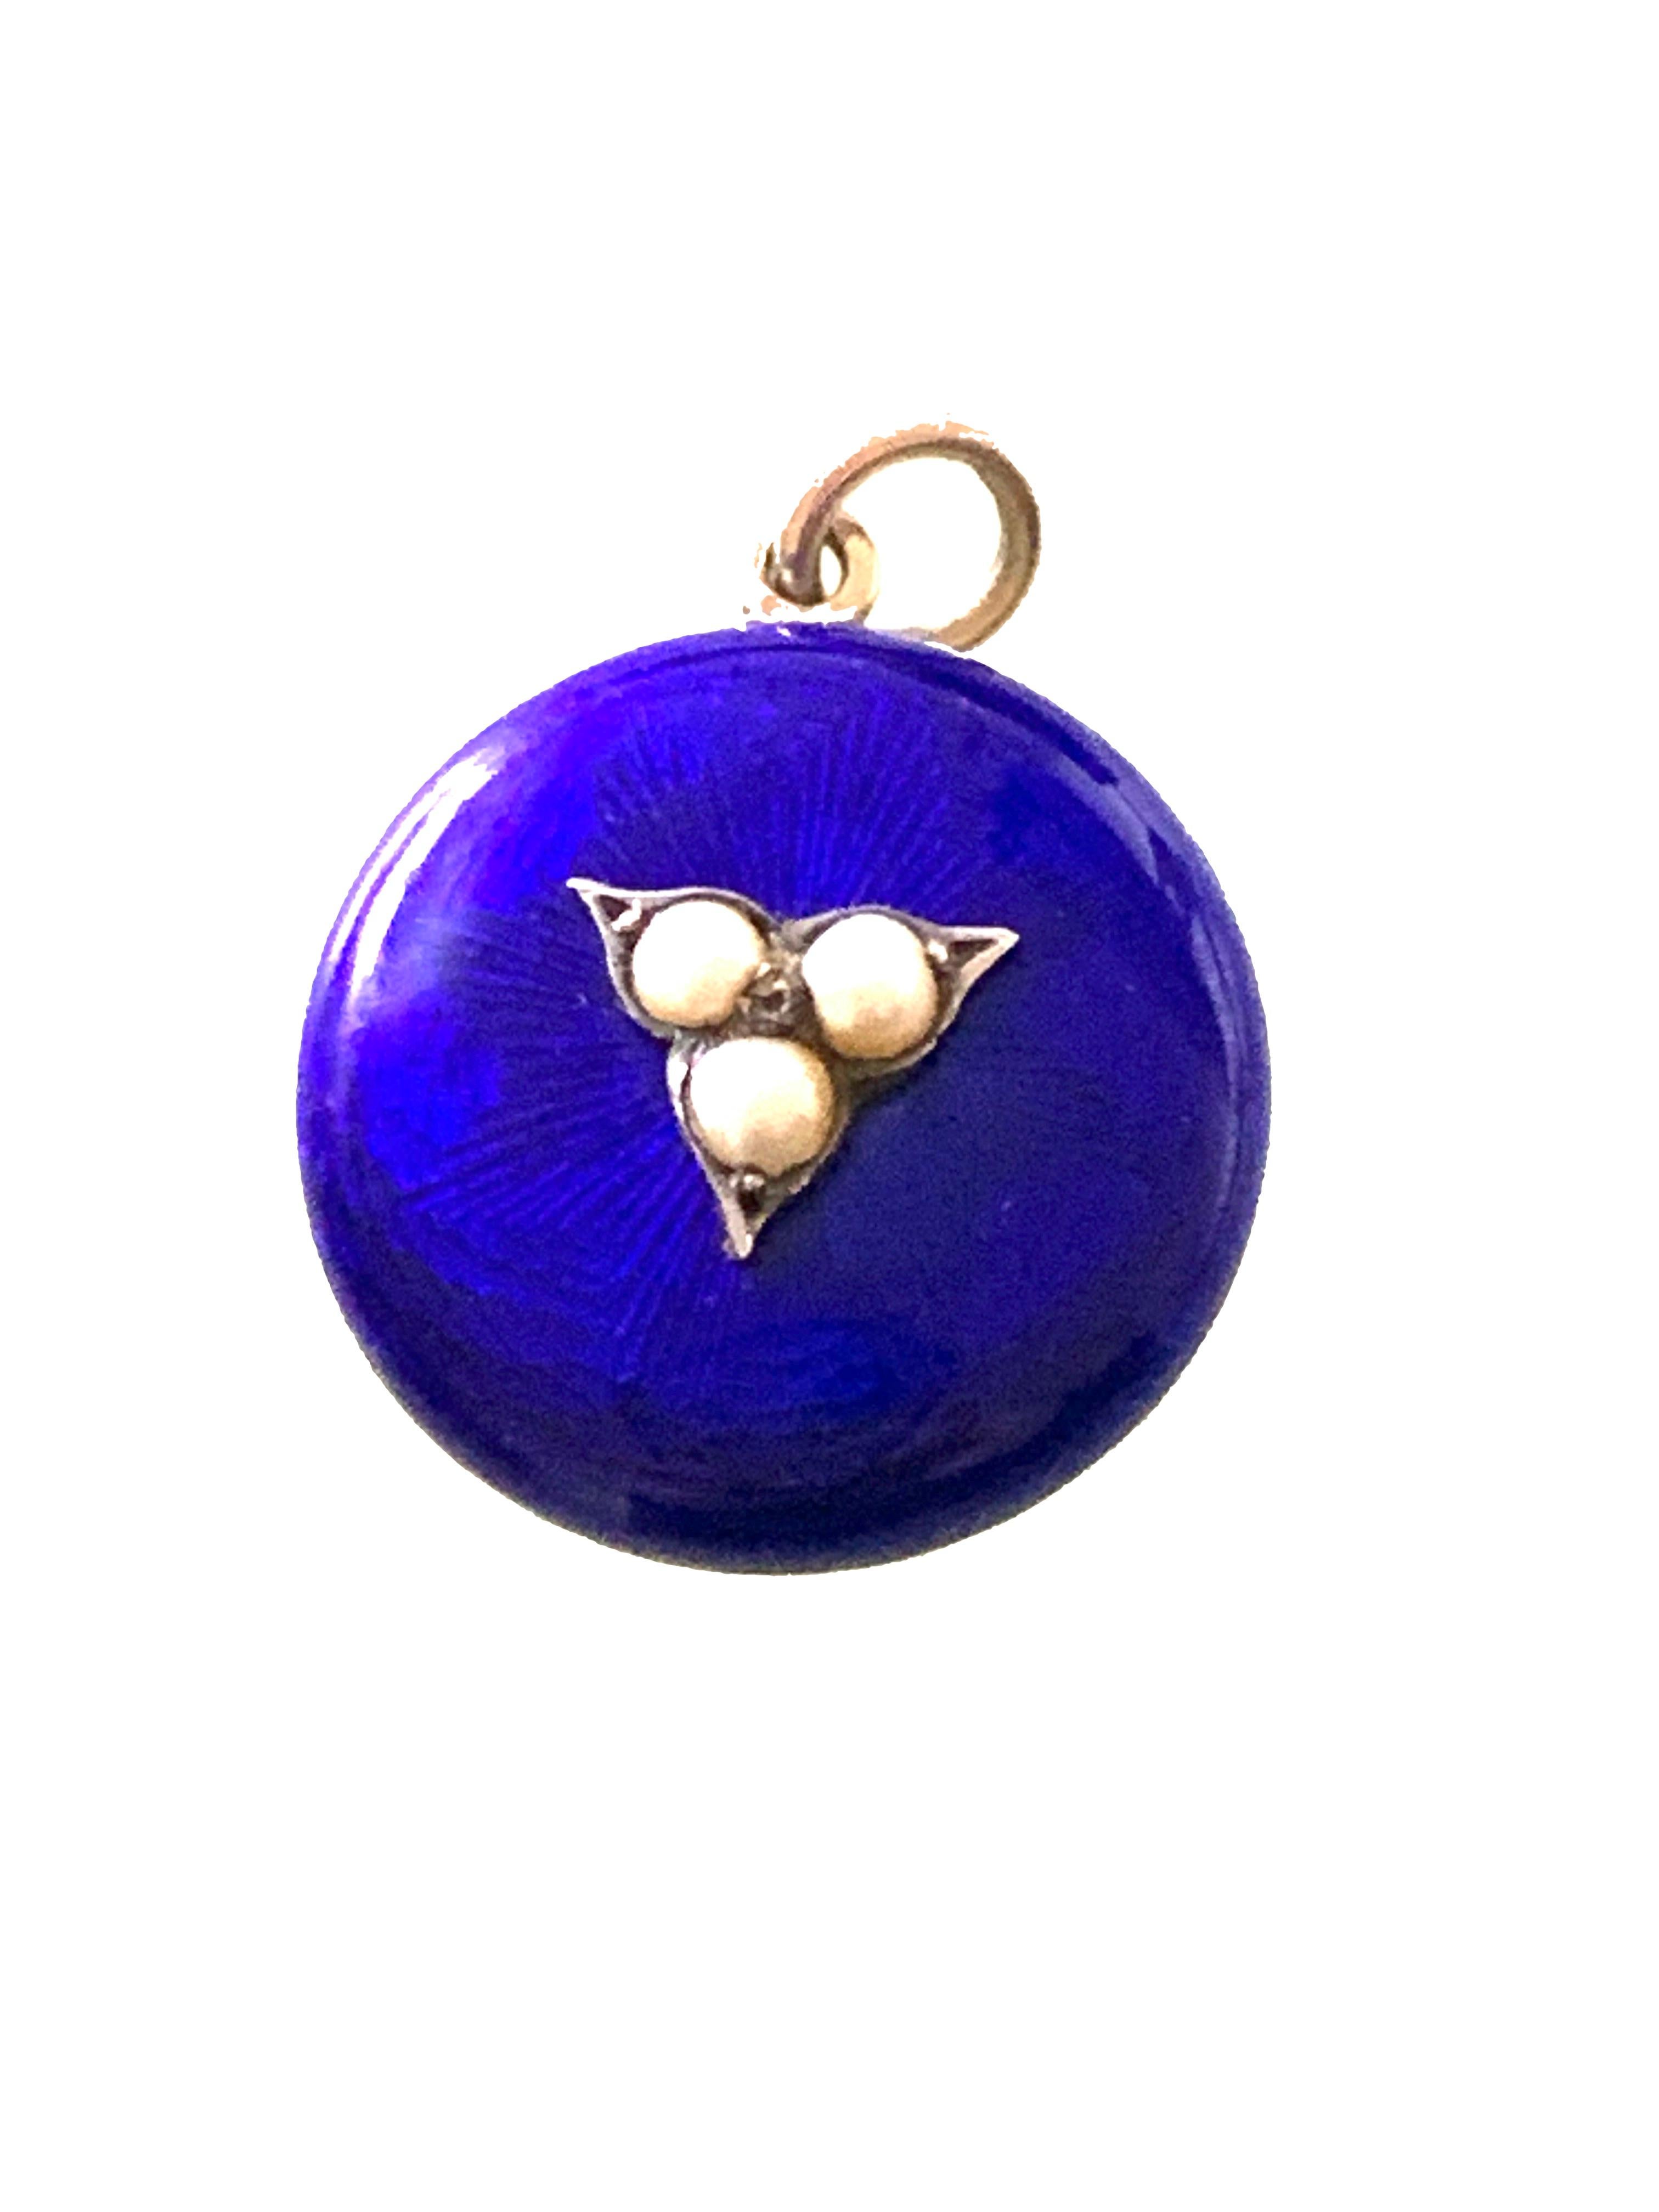 Exquisite
Antique Victorian 9ct Gold
Cobalt Blue enamel Mourning Locket
with three pearls to the front
Reverse contains a snippet of hair
The enamel is in excellent order 
( no chips but the central diamond is missing
this would have been in the